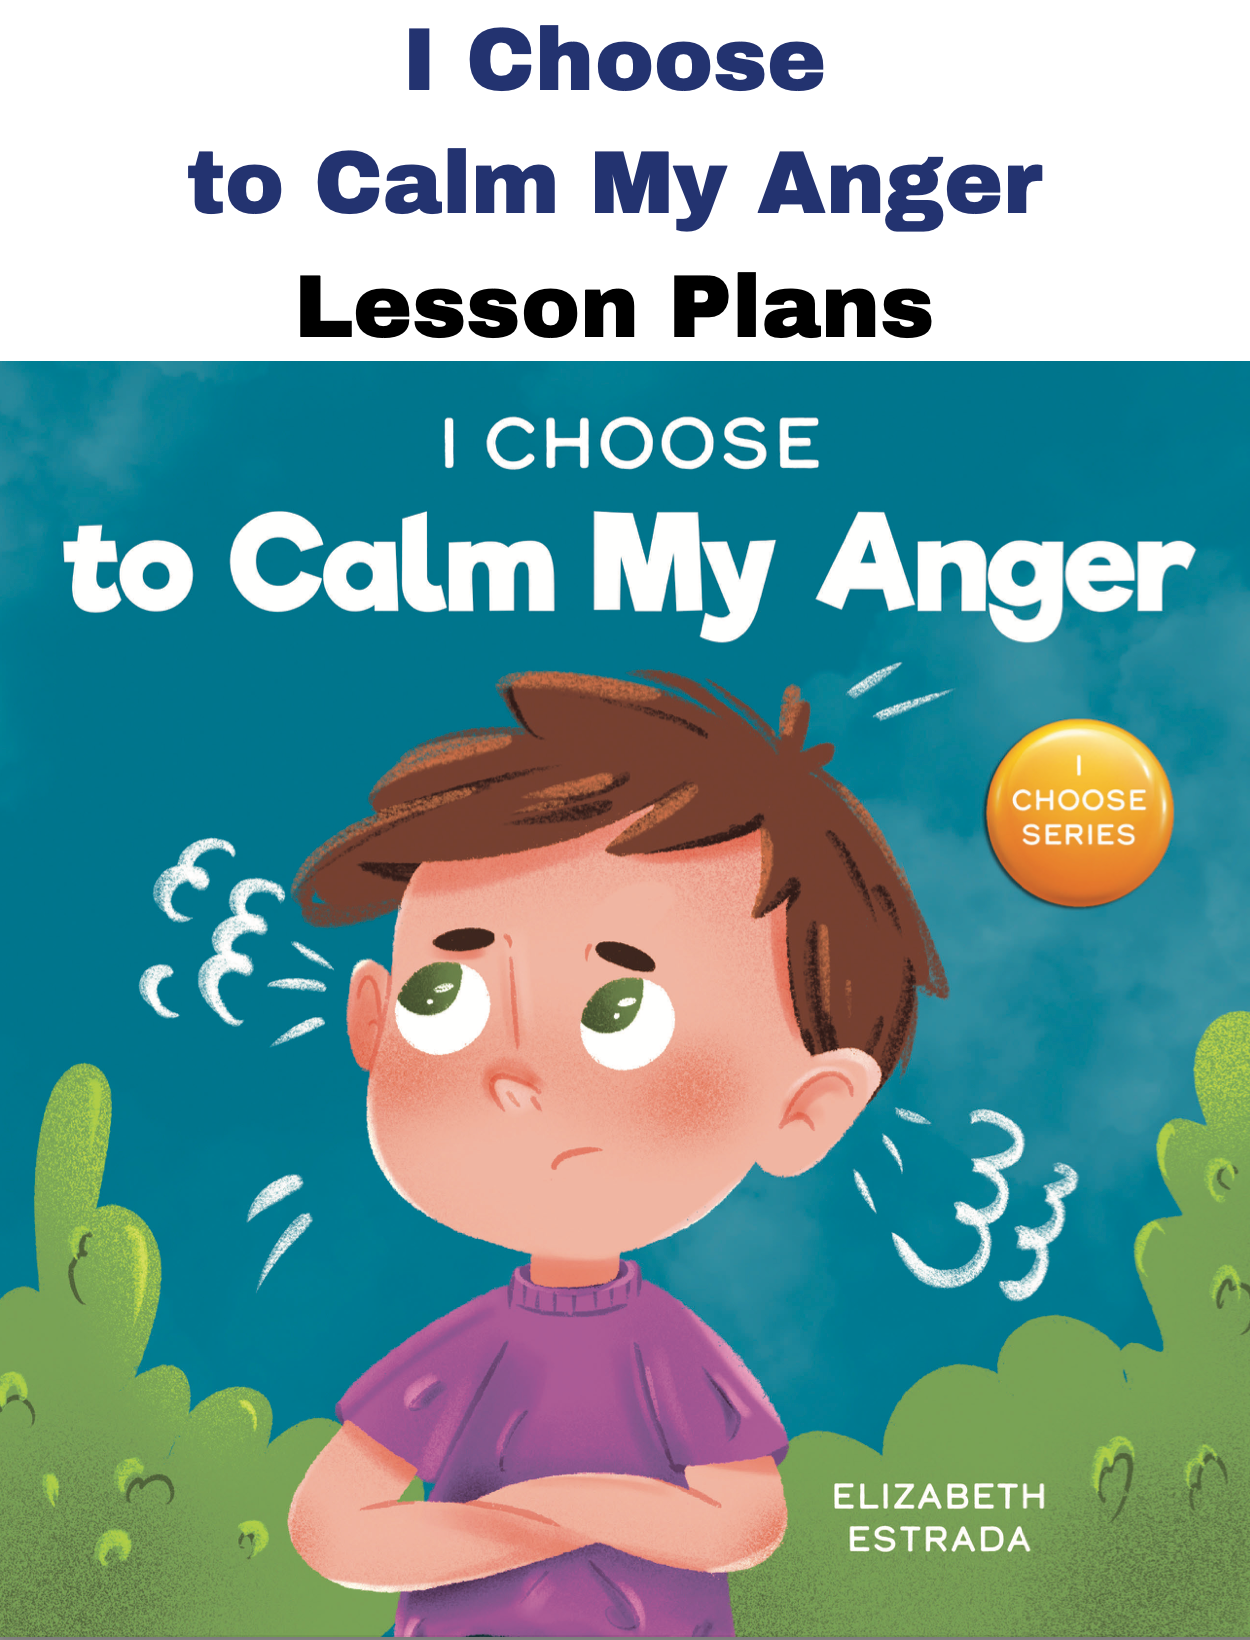 I Choose to Calm My Anger SEL Lesson Plan